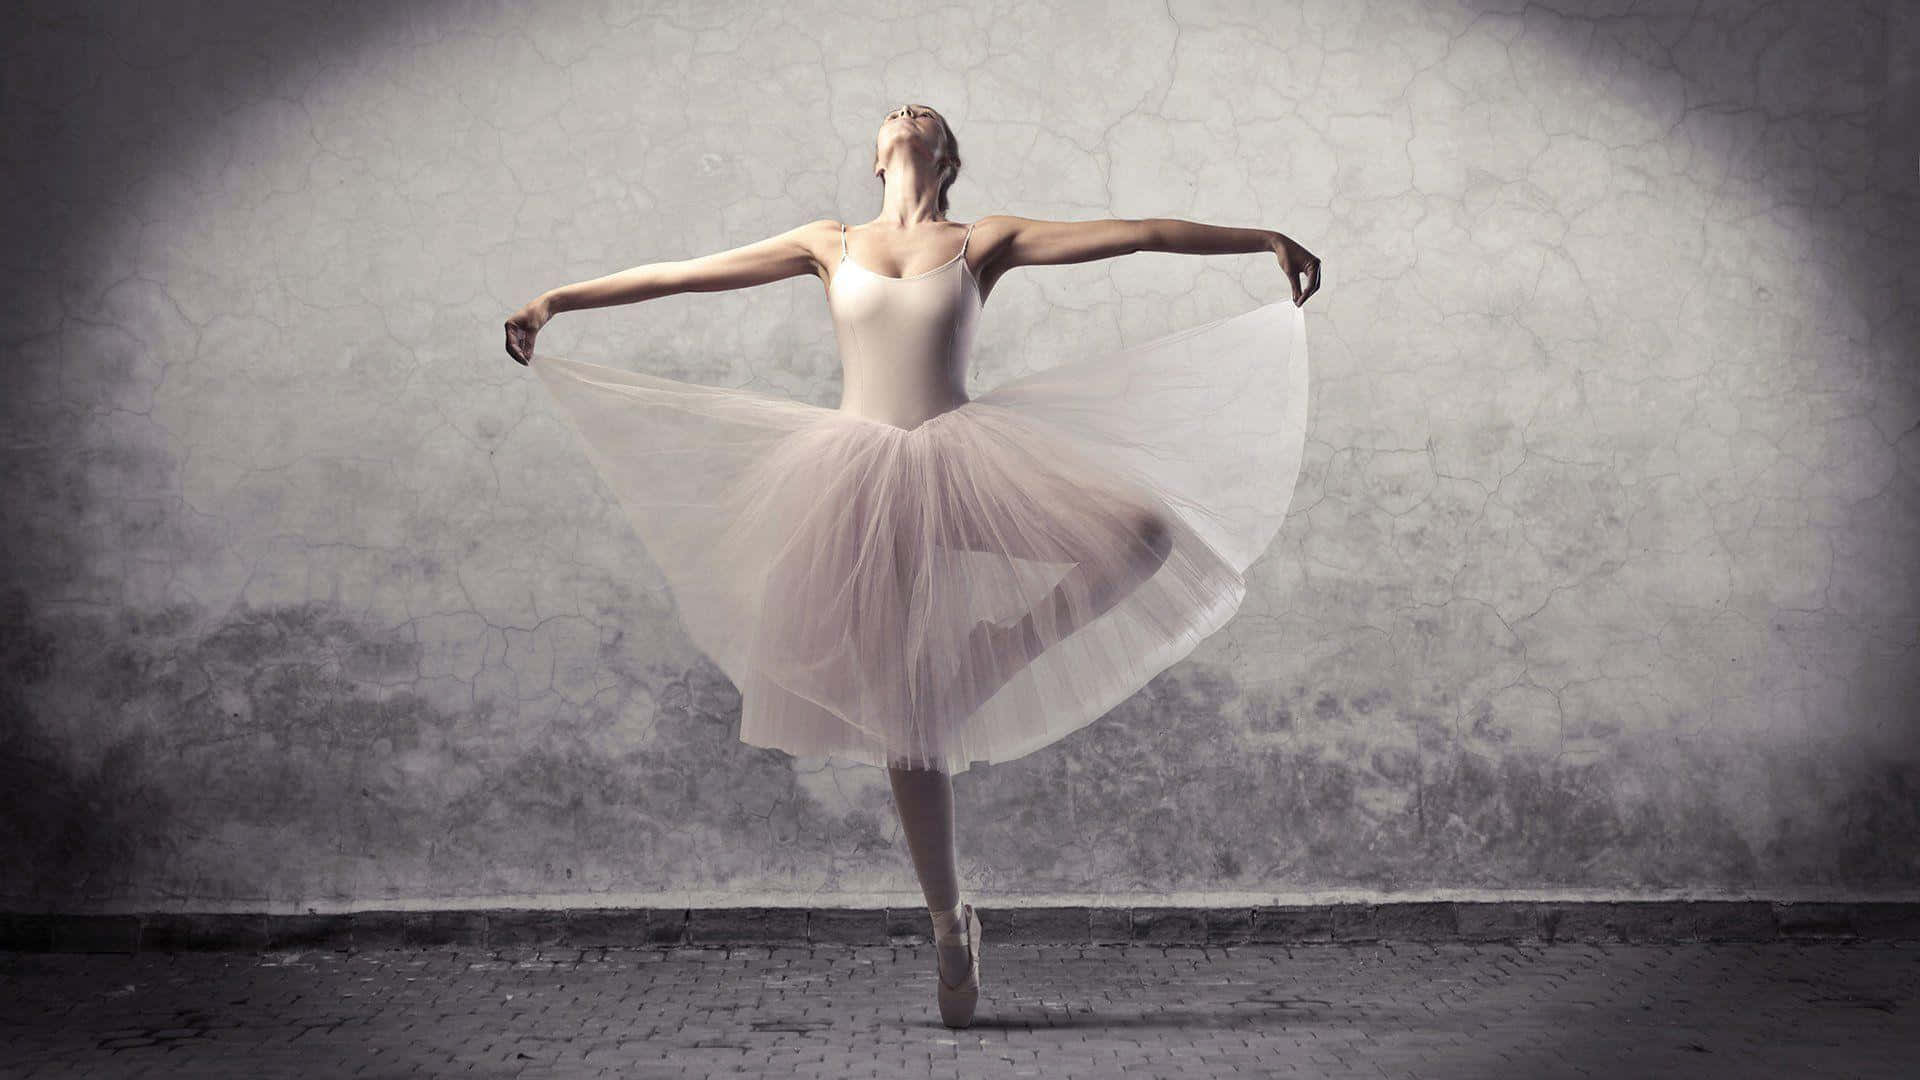 A graceful ballerina in her pink pointe shoes, on her toes in the dreamy swirl of a pirouette Wallpaper